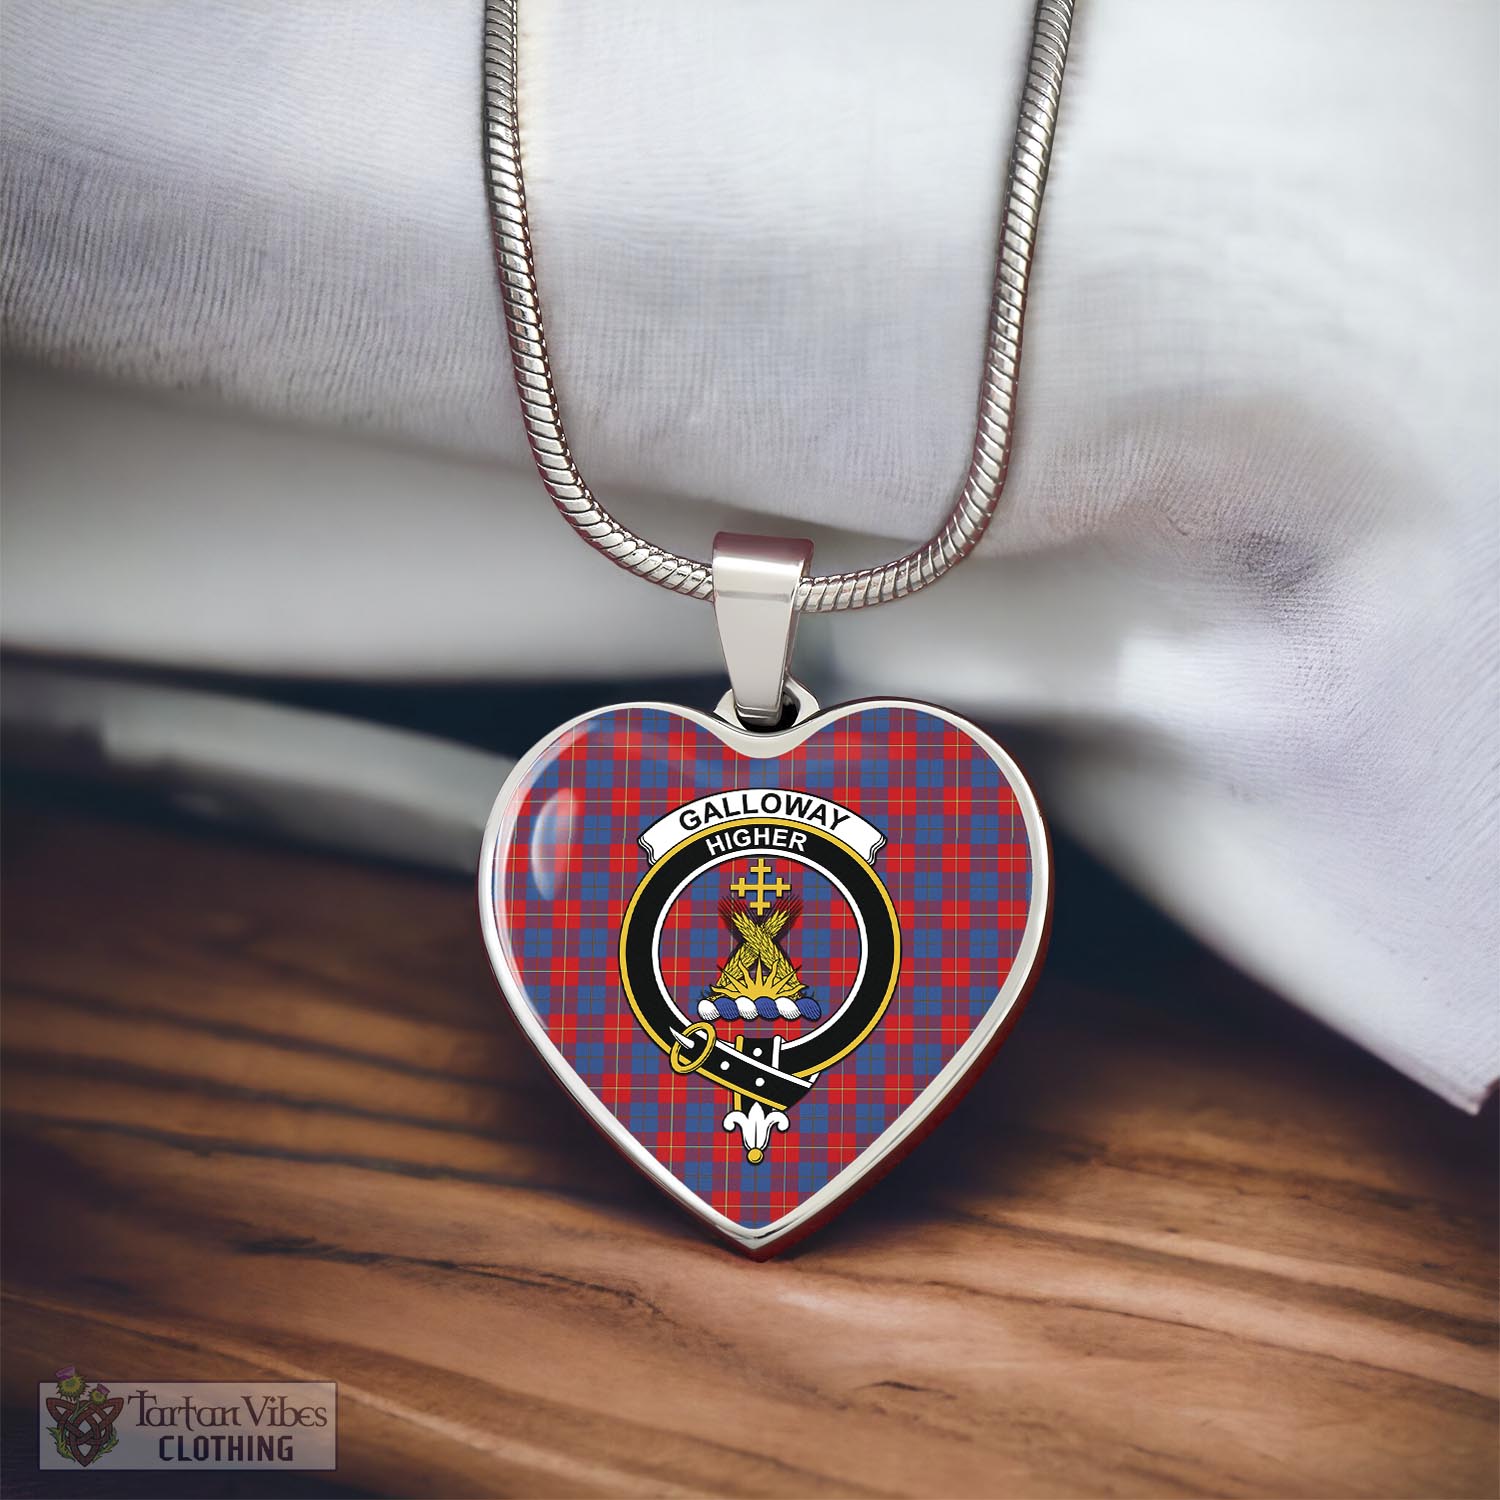 Tartan Vibes Clothing Galloway Red Tartan Heart Necklace with Family Crest